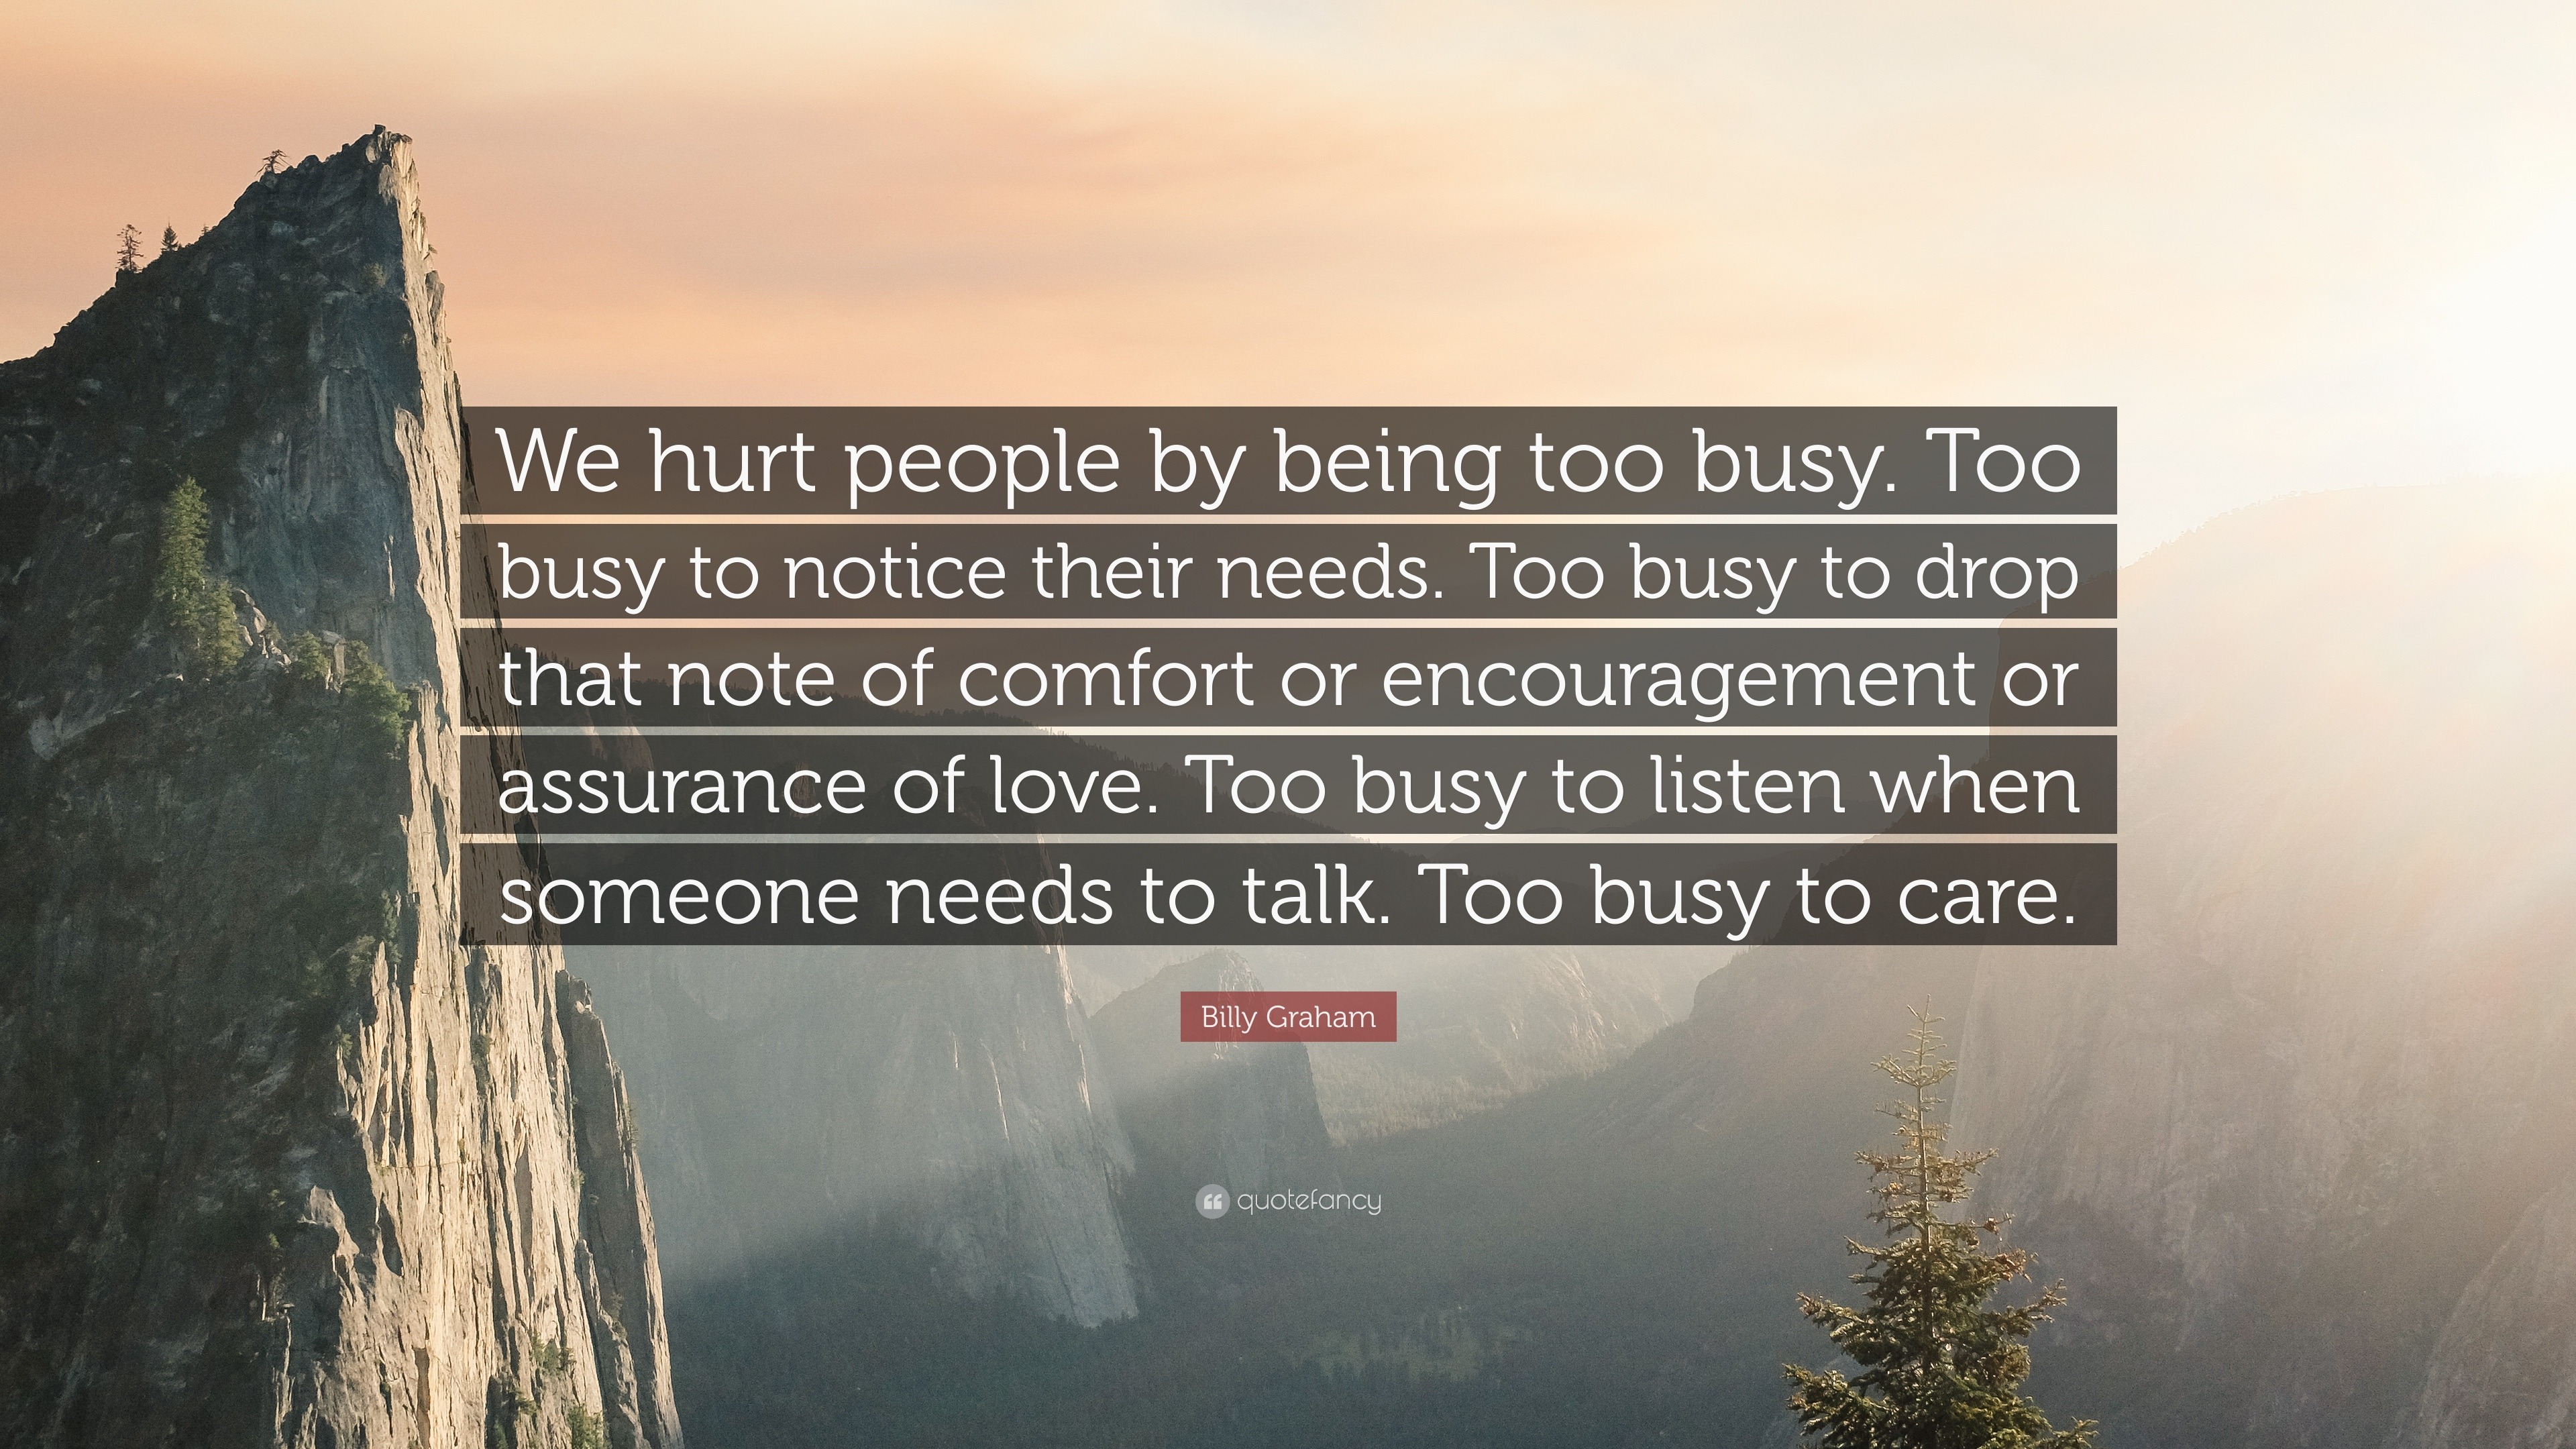 Billy Graham Quote “We hurt people by being too busy Too busy to